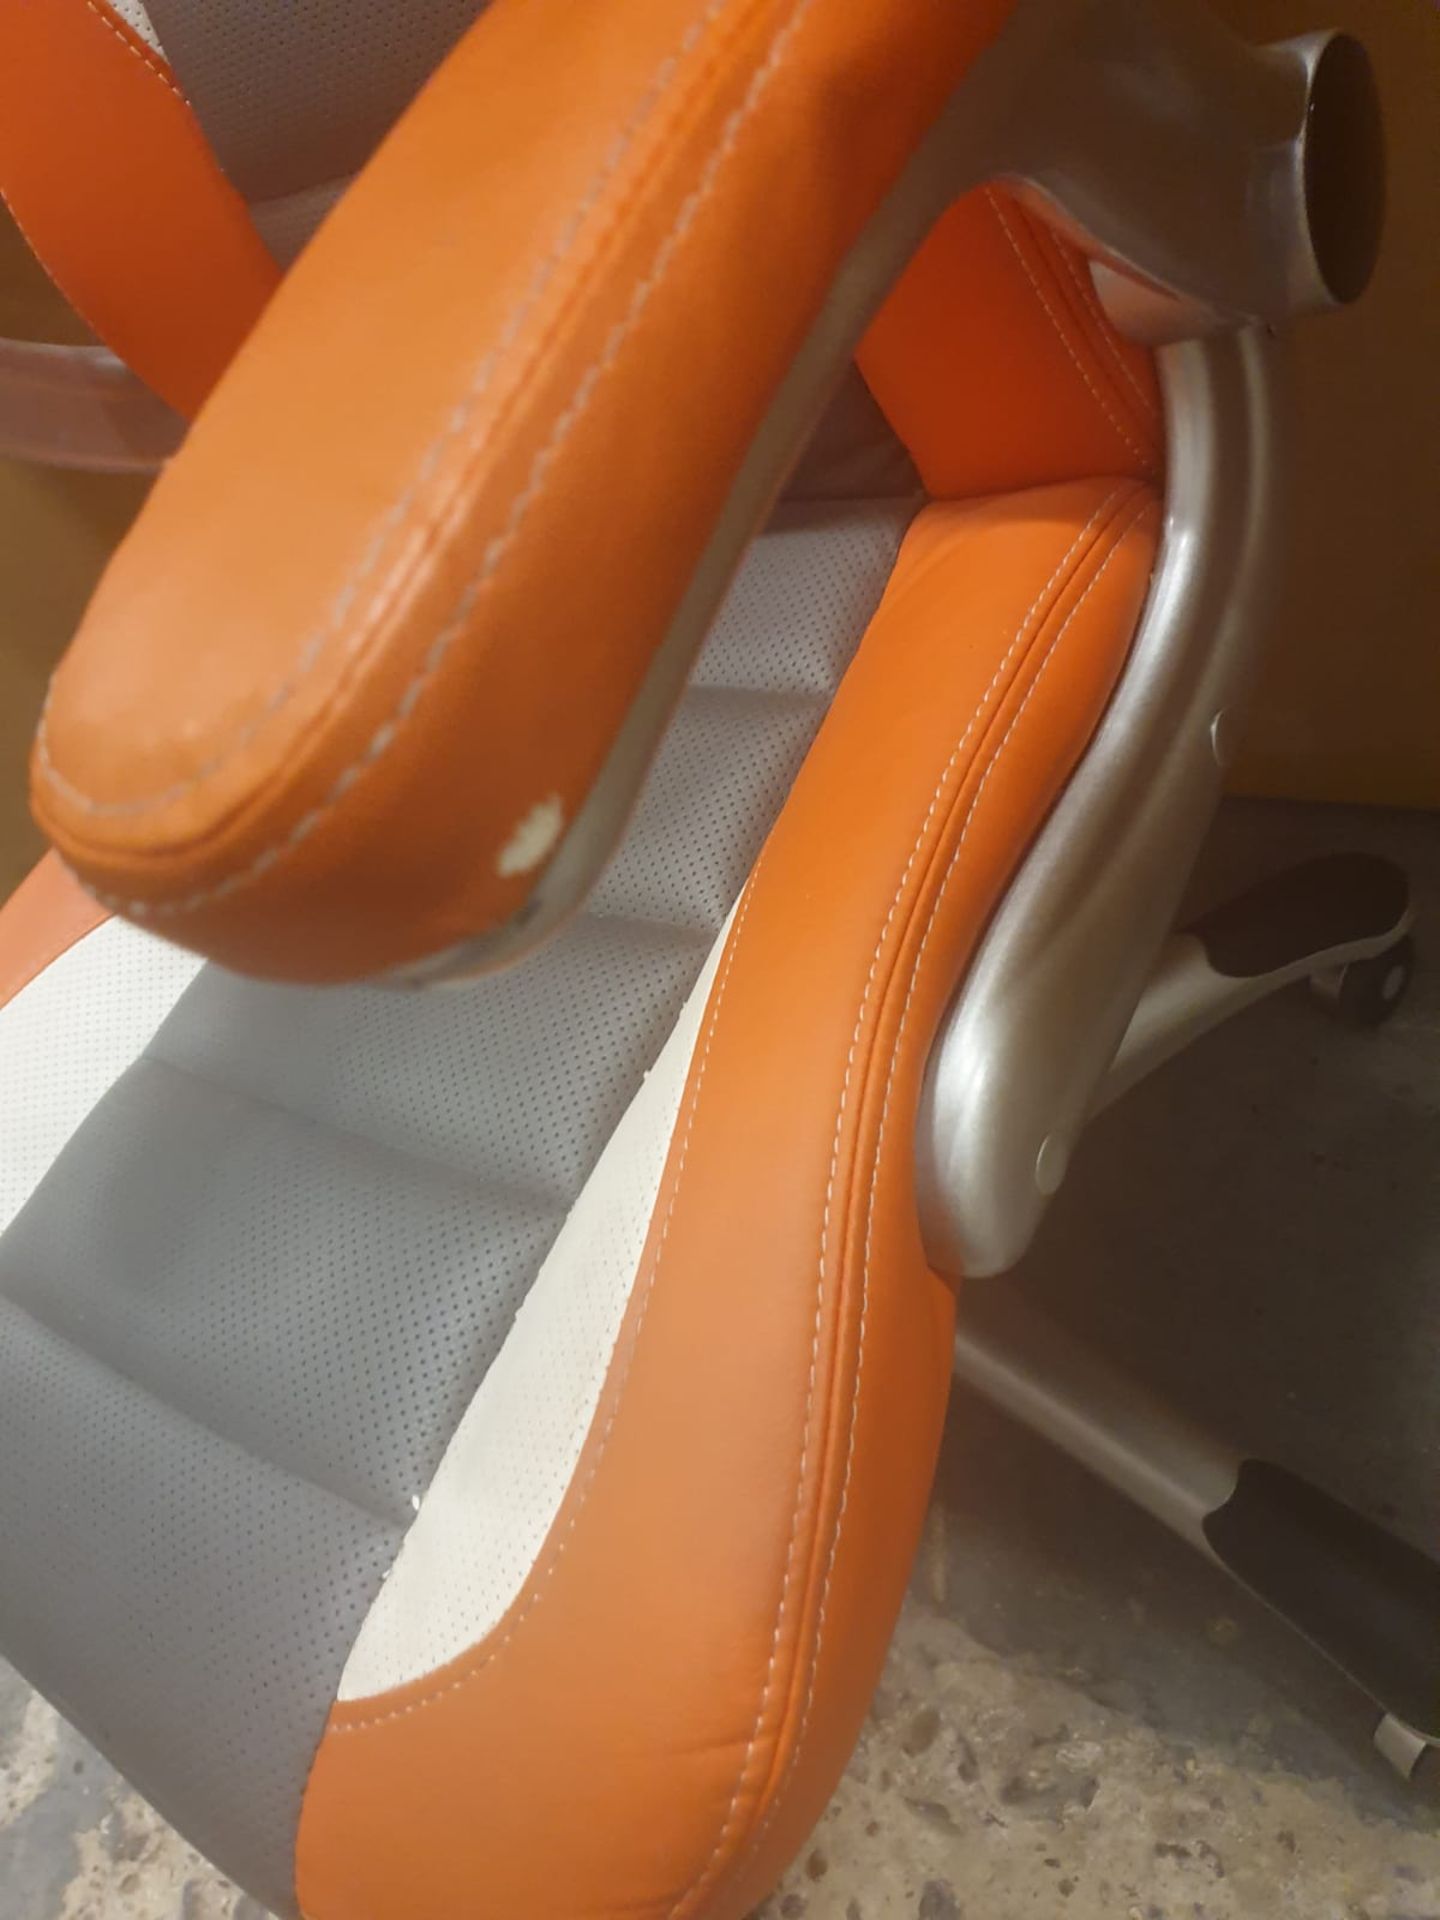 HJH Office, 621700, Gaming Chair, Home Office Chair, Racer Sport, Orange, Faux Leather, High Back - Image 2 of 2